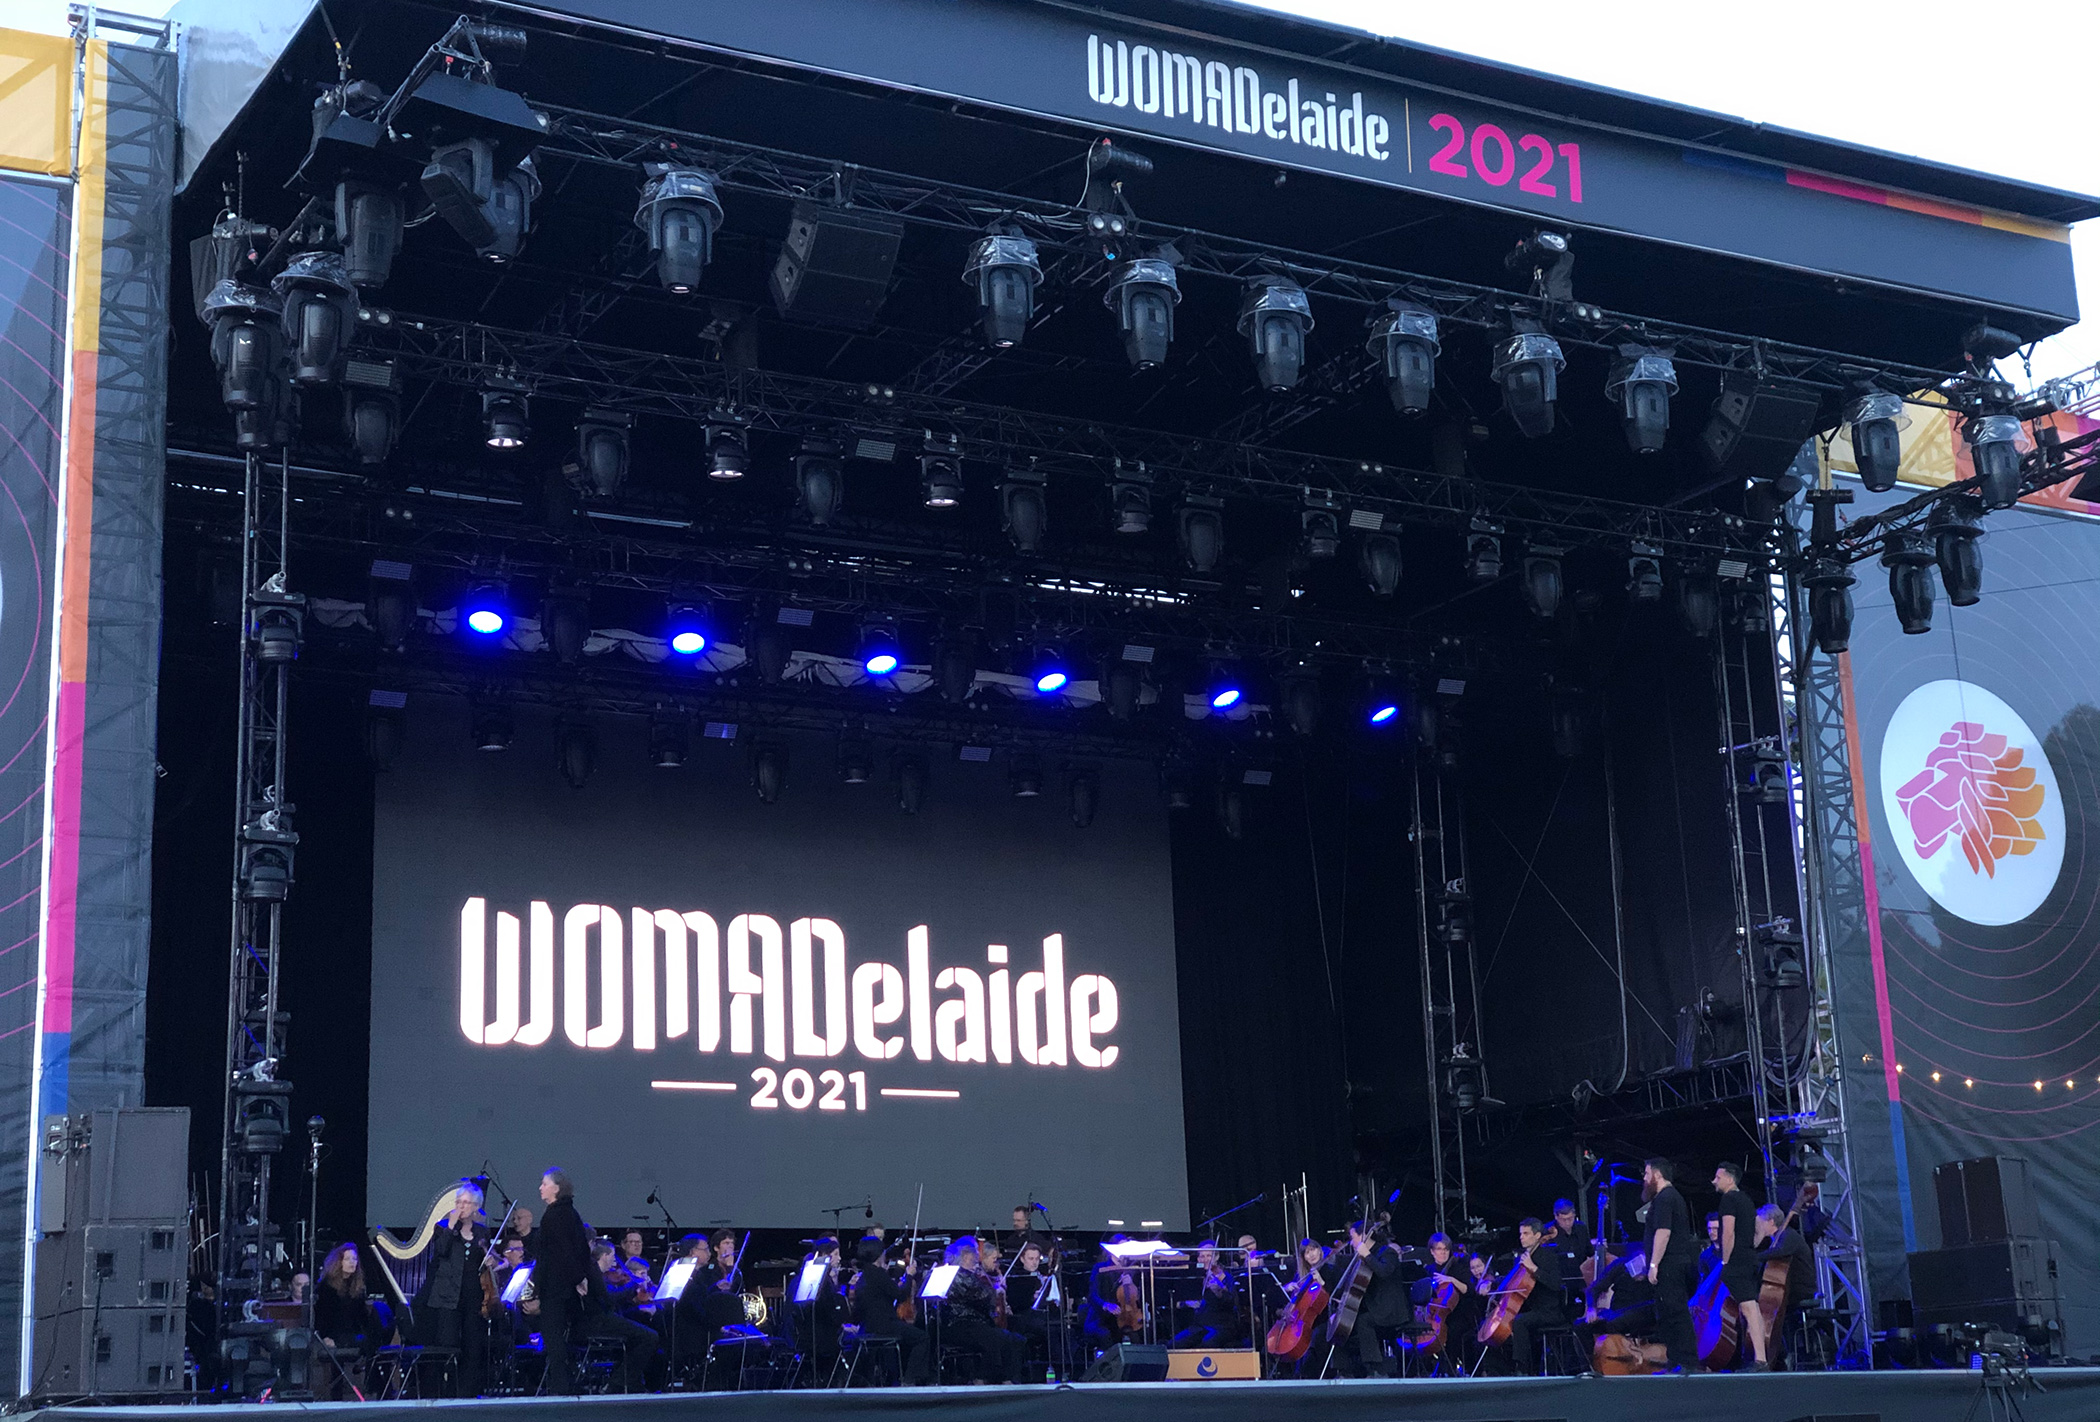 WOMADelaide 2021 - the stage is set for Compassion